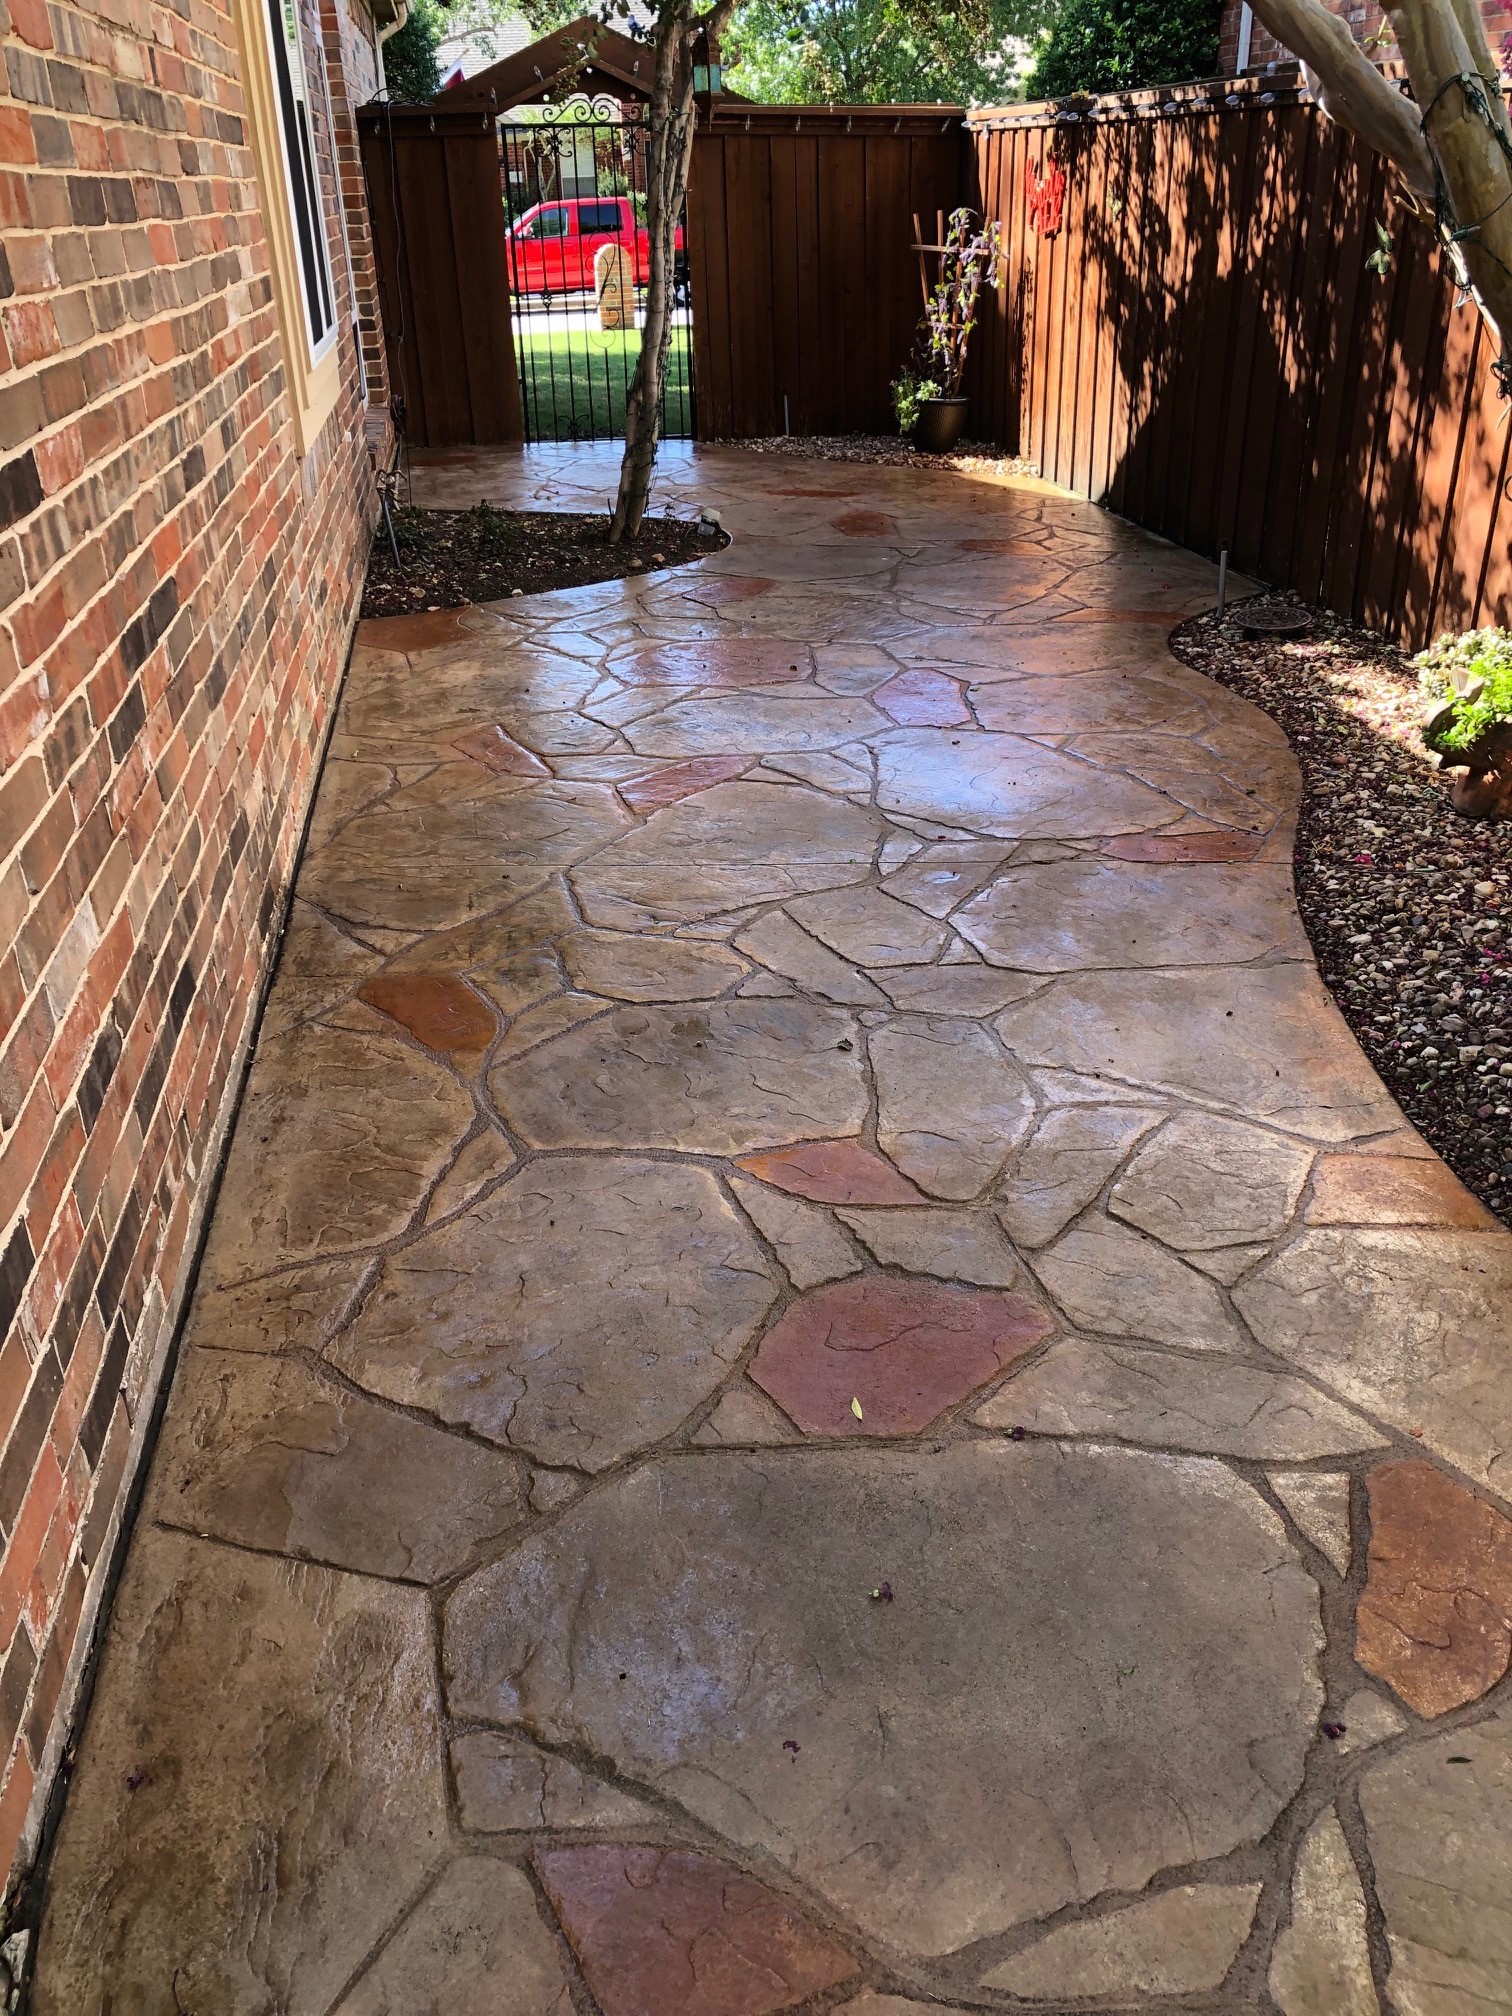 Khaki, Cafe Royale and Terra Cotta Antiquing Stains on Faded Stamped Concrete Patio